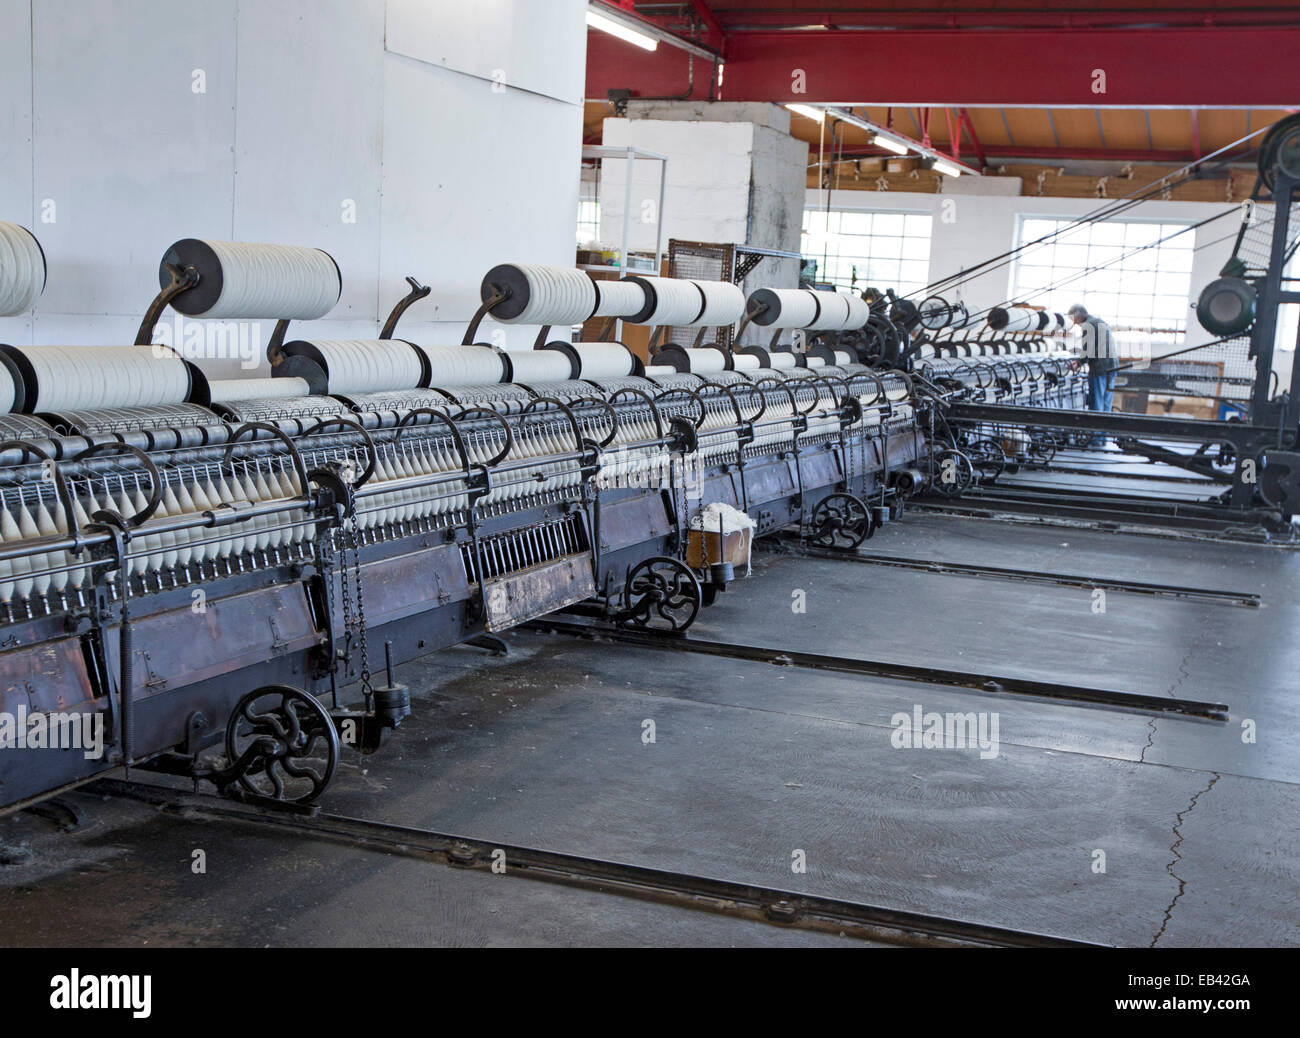 Array of machines for spinning wool in workroom at historic Trefriw Woollen Mills, a popular tourist attraction in Wales Stock Photo